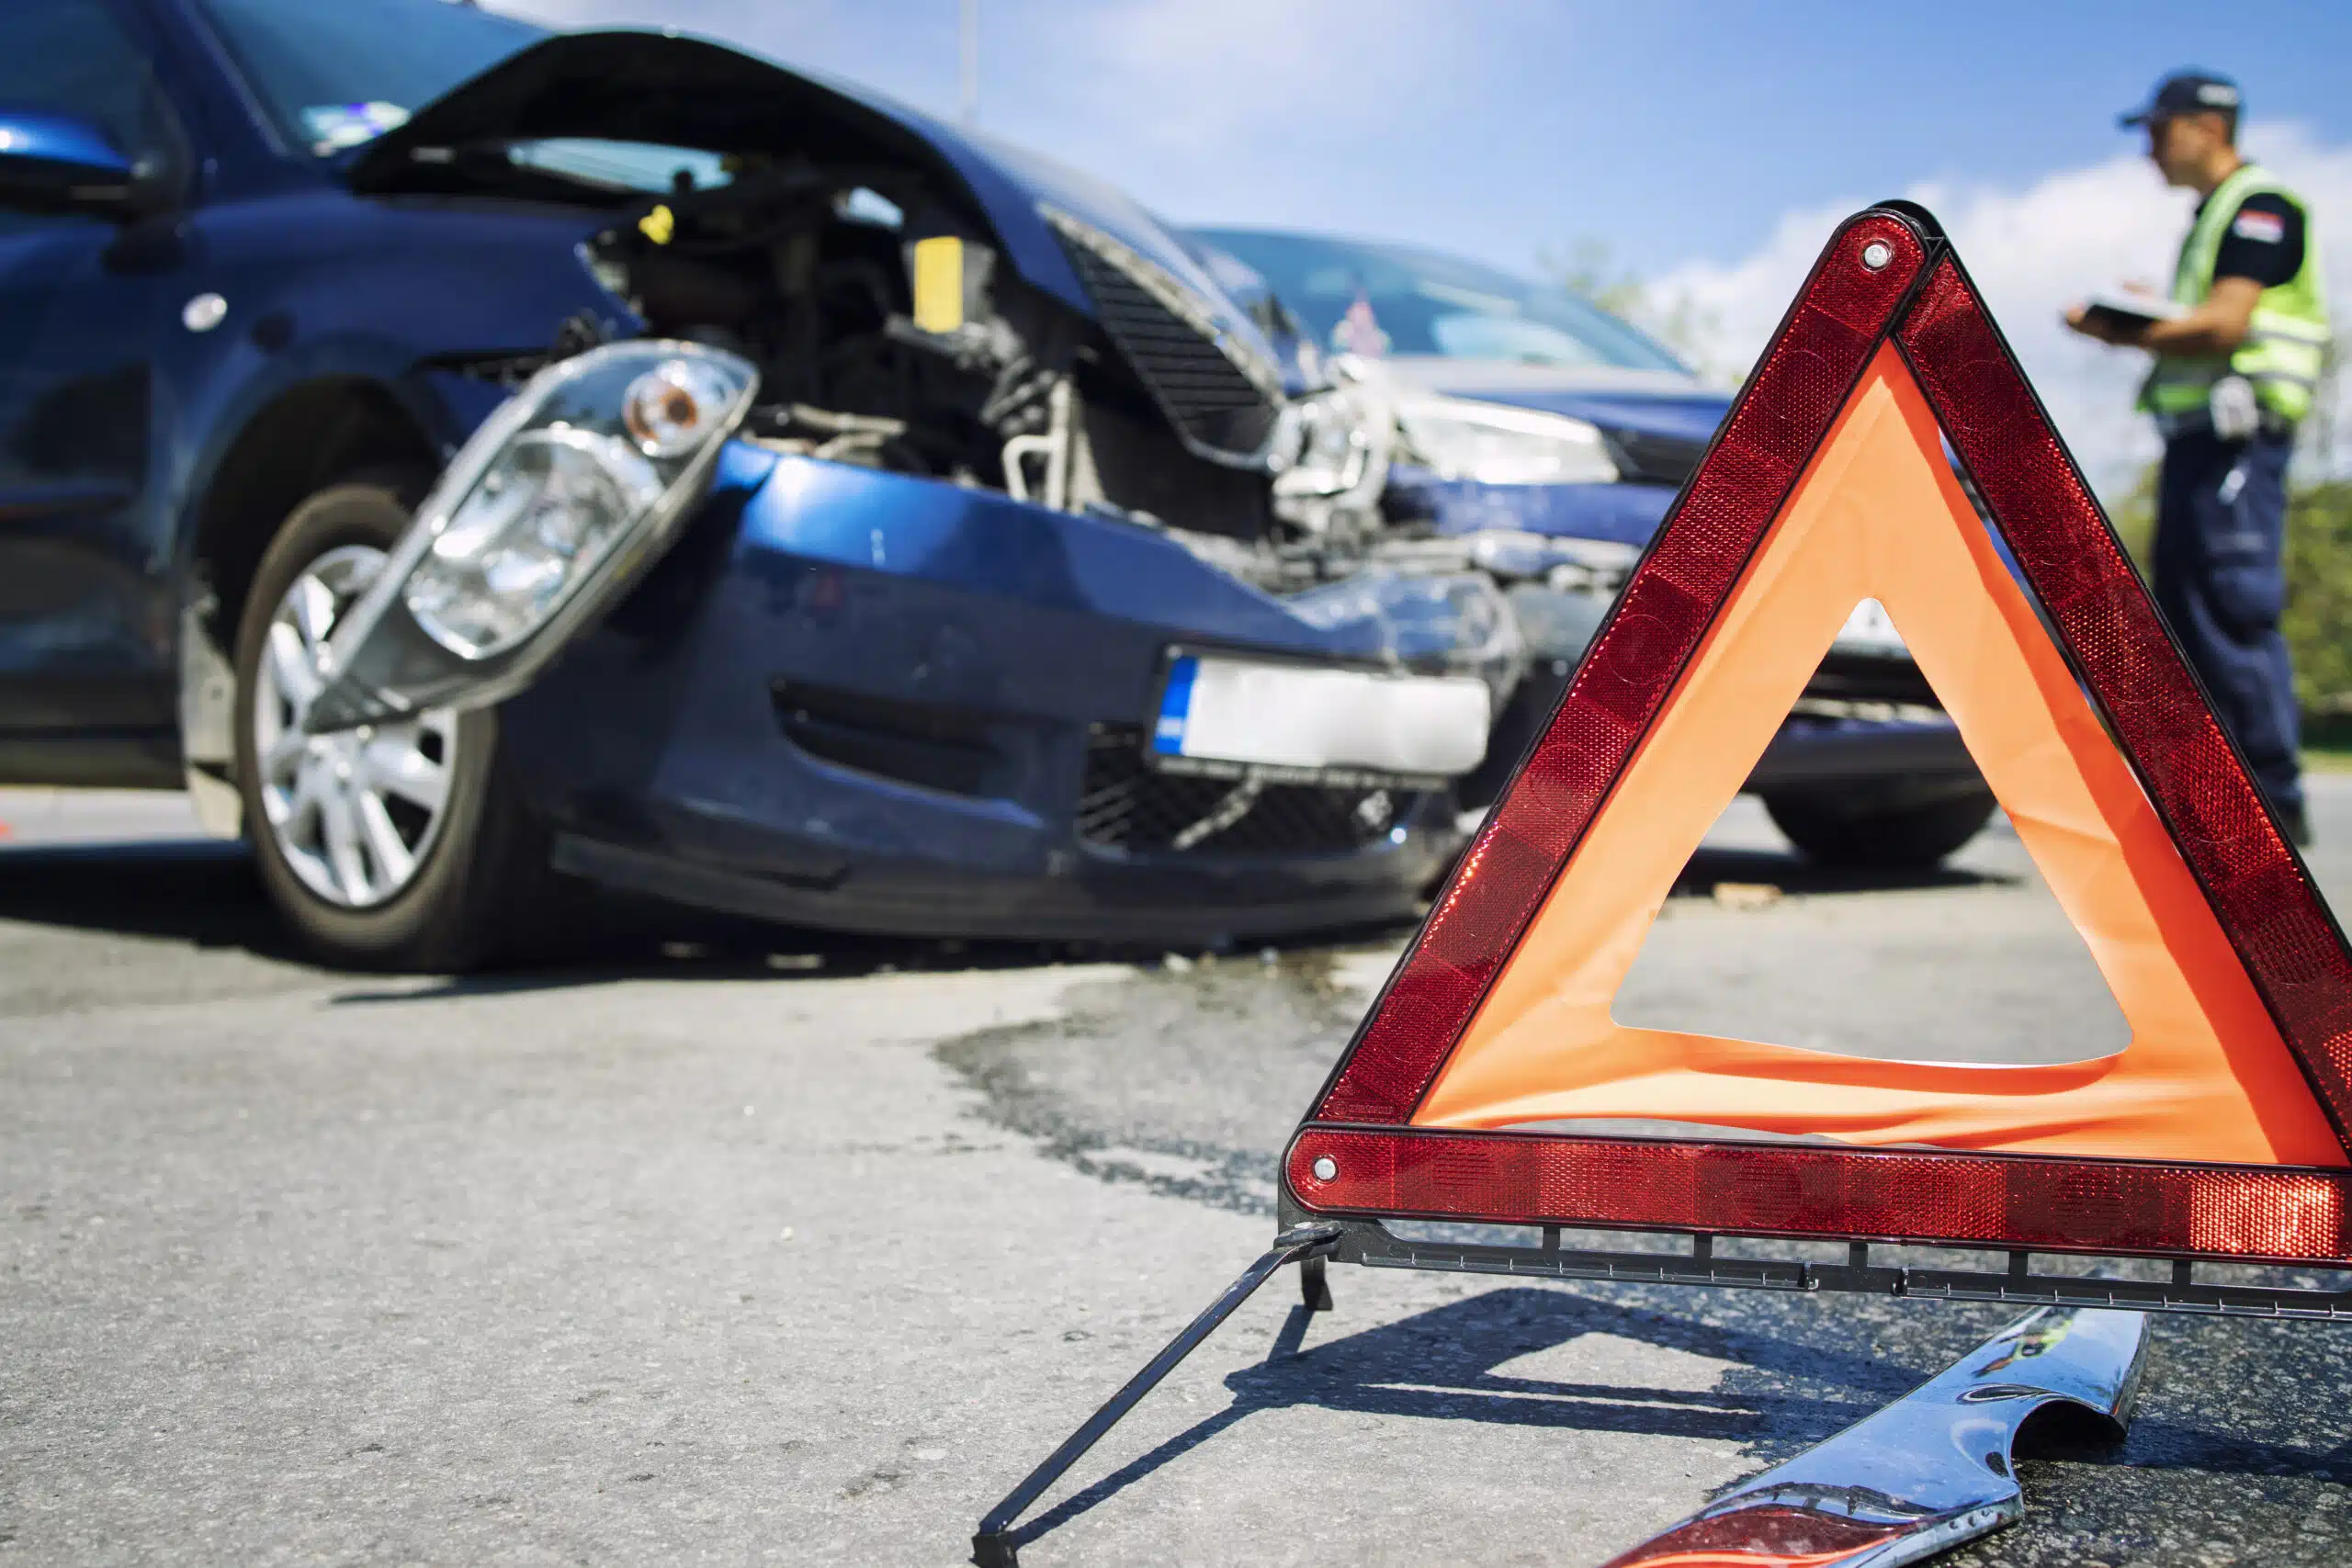 Road accident with smashed cars and a caution sign